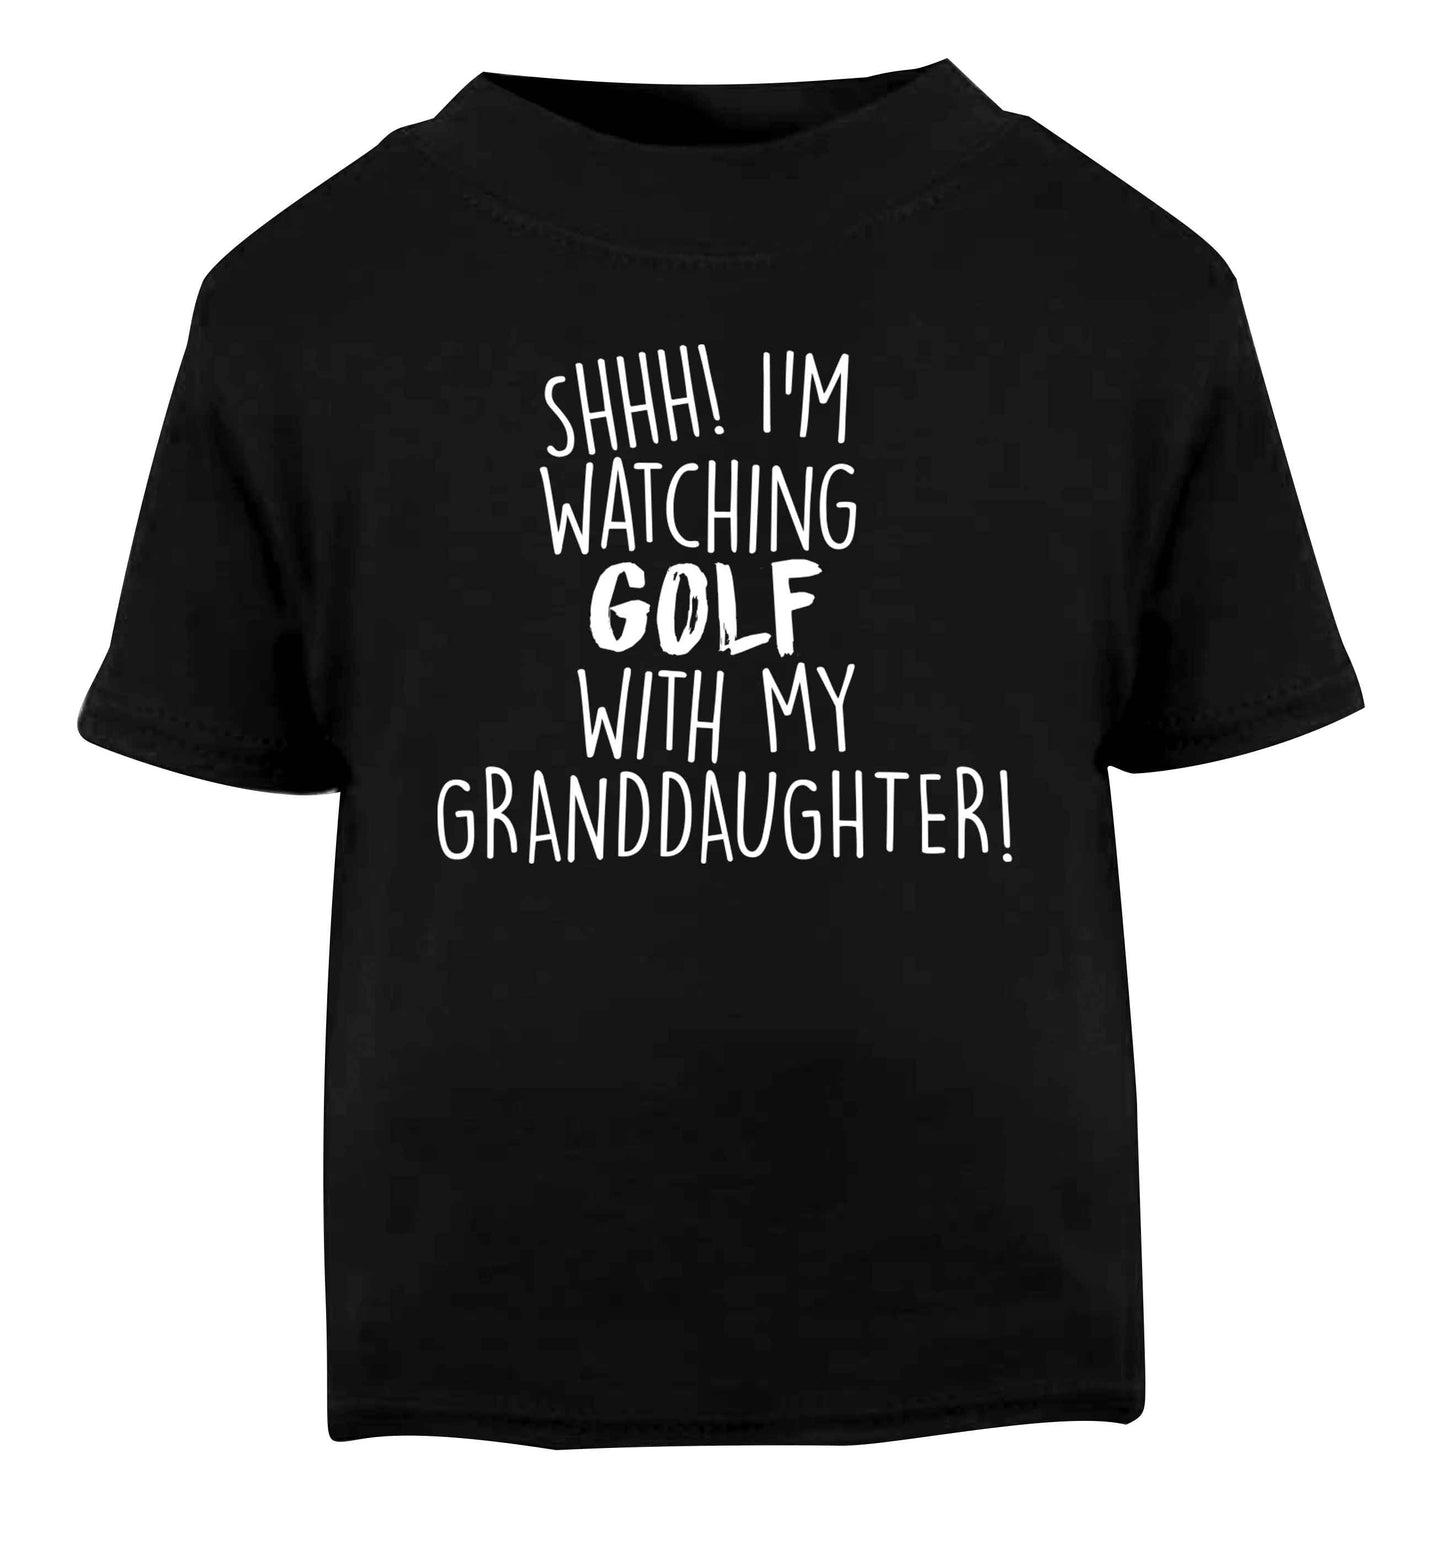 Shh I'm watching golf with my granddaughter Black Baby Toddler Tshirt 2 years